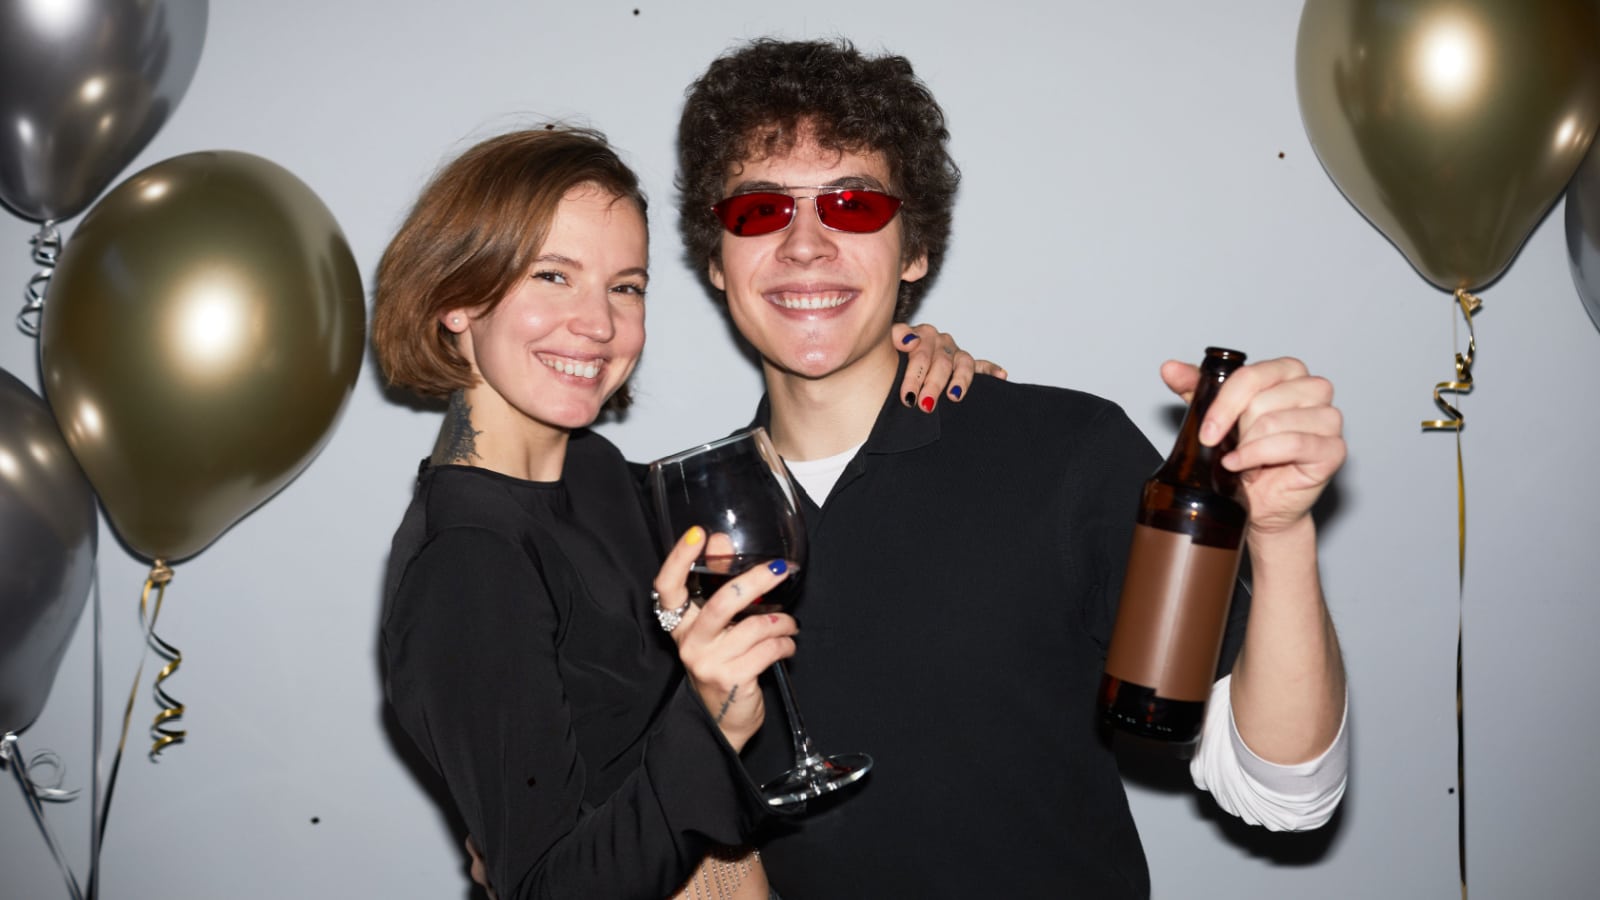 Waist up portrait of smiling young couple partying and looking at camera holding drinks, shot with flash